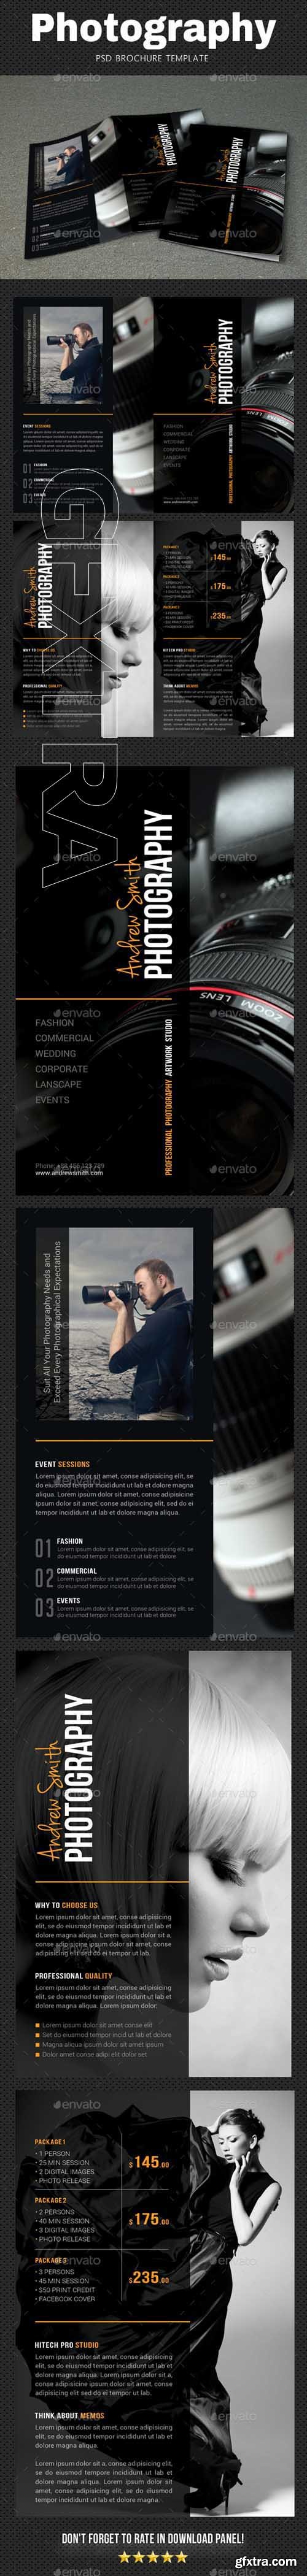 GraphicRiver - Photography Brochure 2 20670432